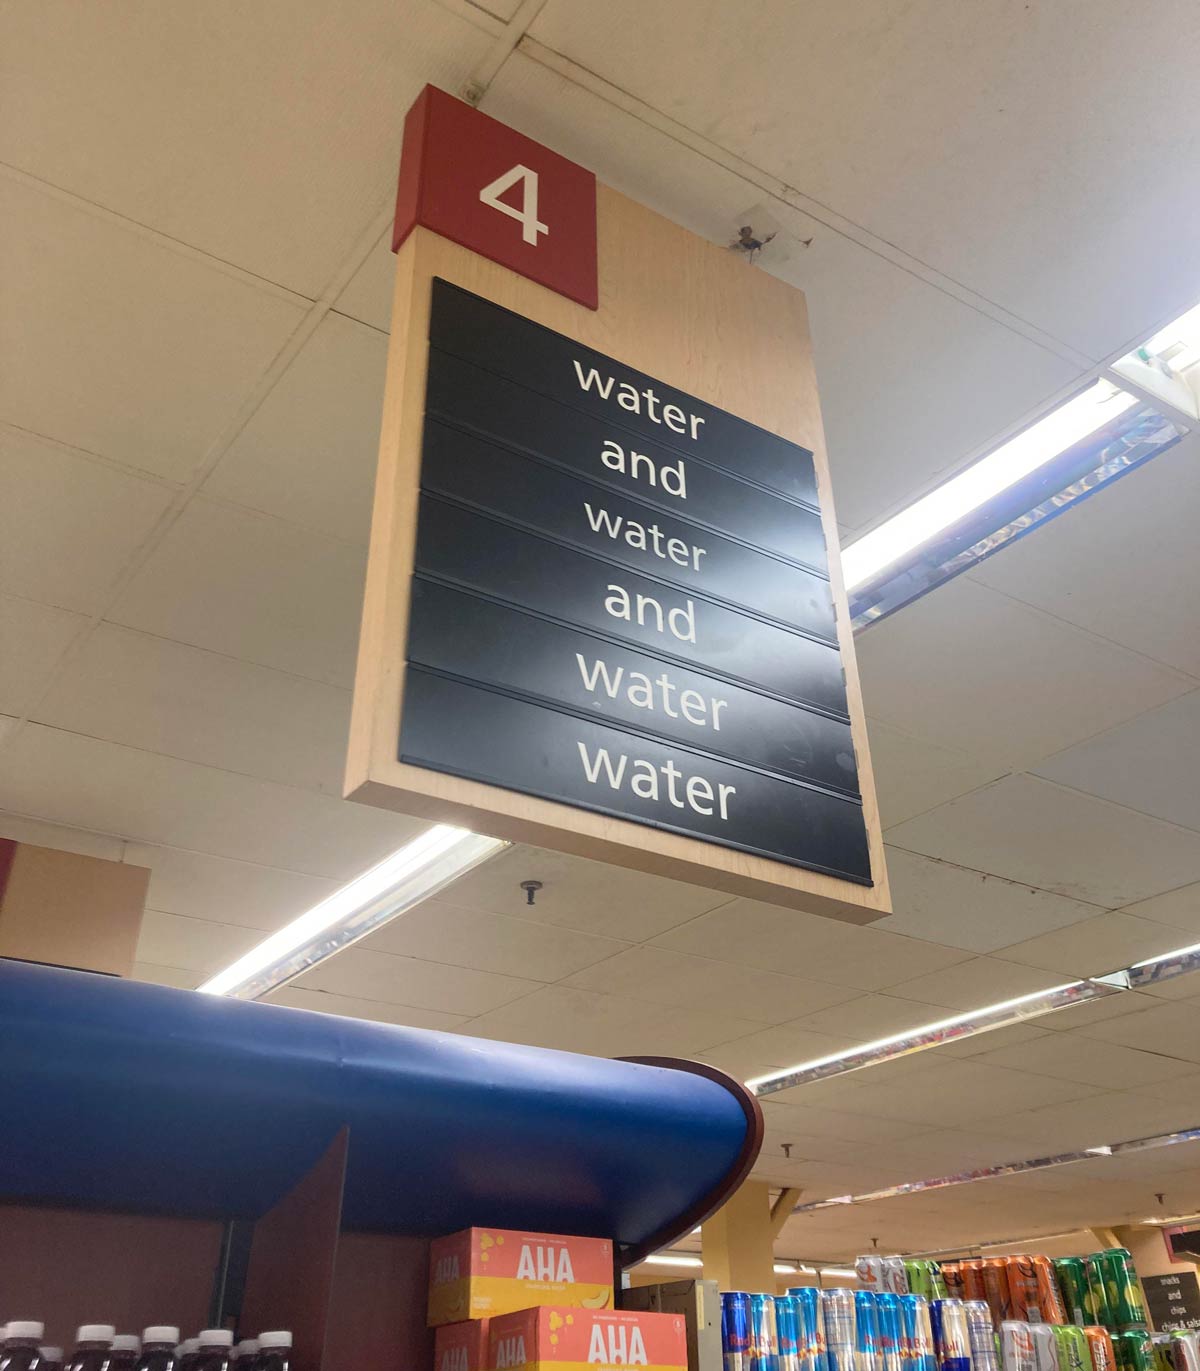 This isle in Safeway